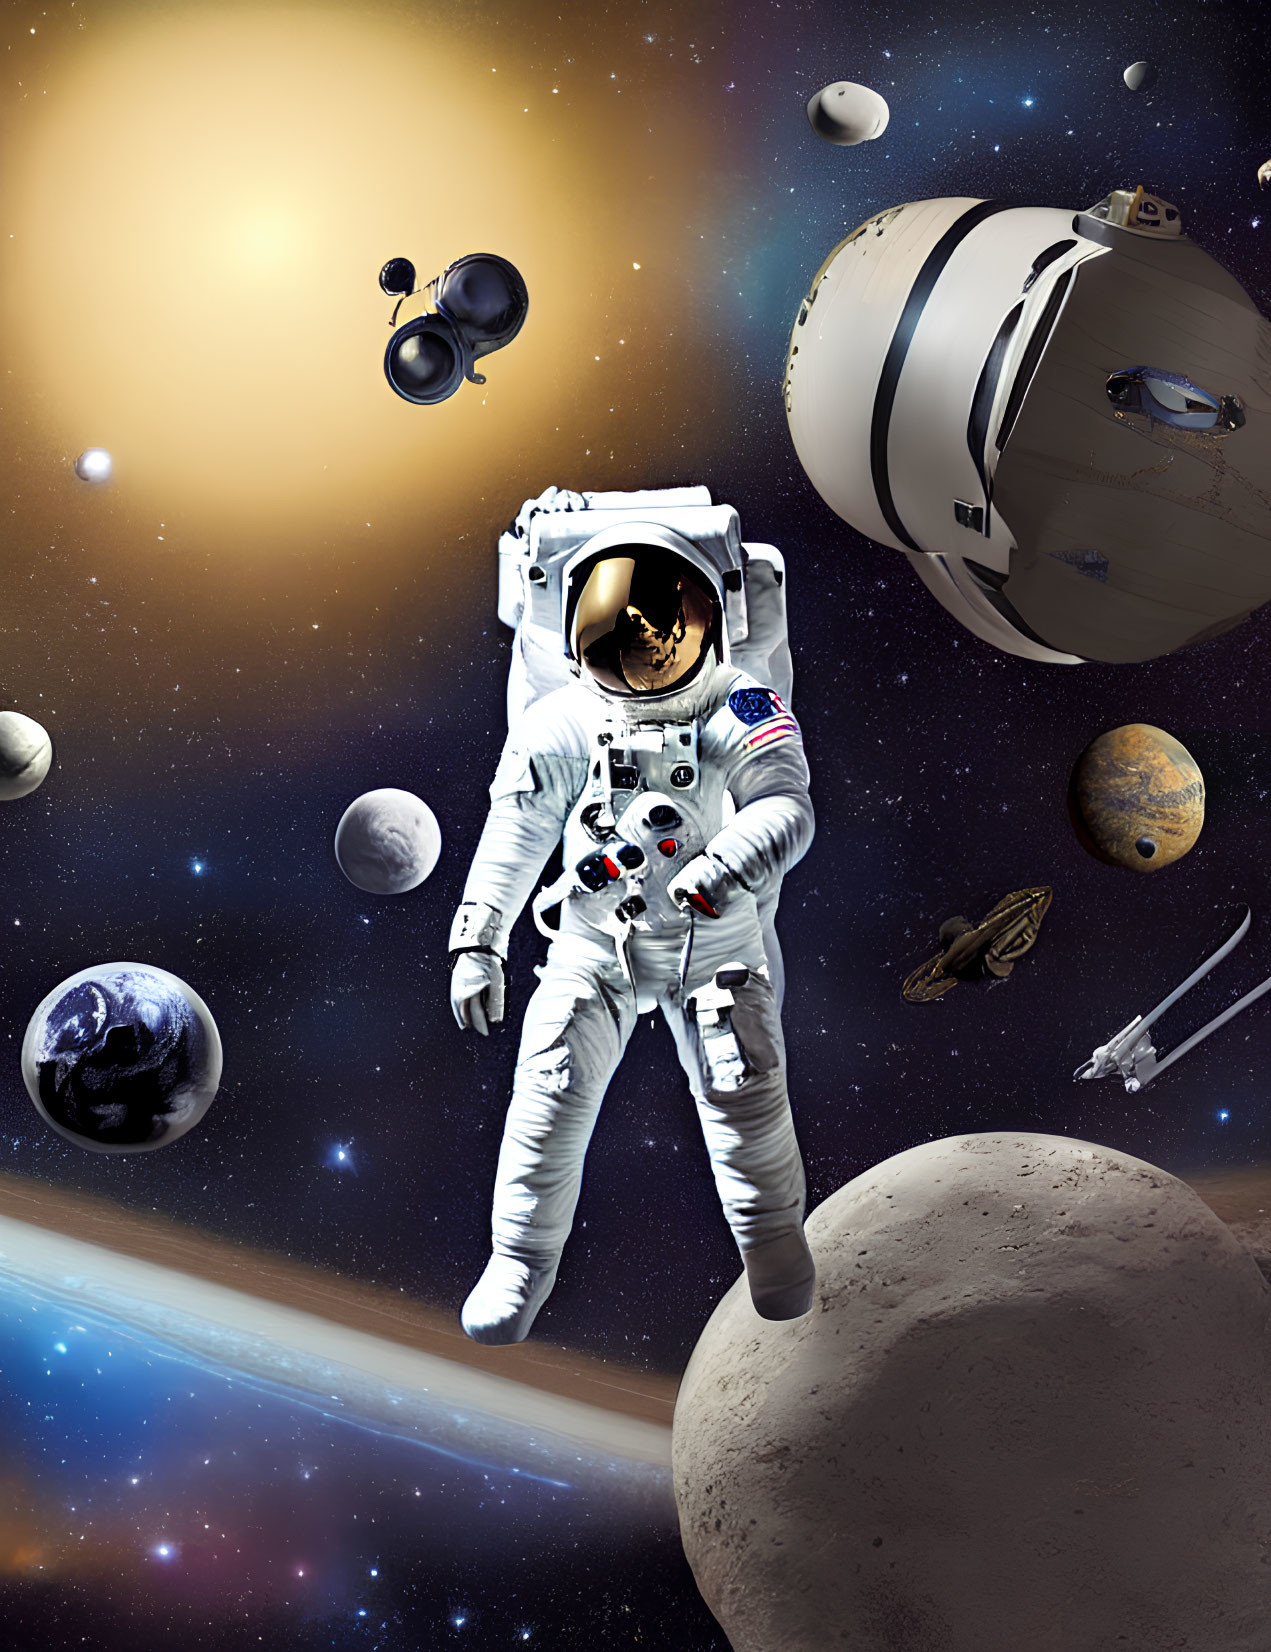 Astronaut in space surrounded by celestial bodies and spacecraft